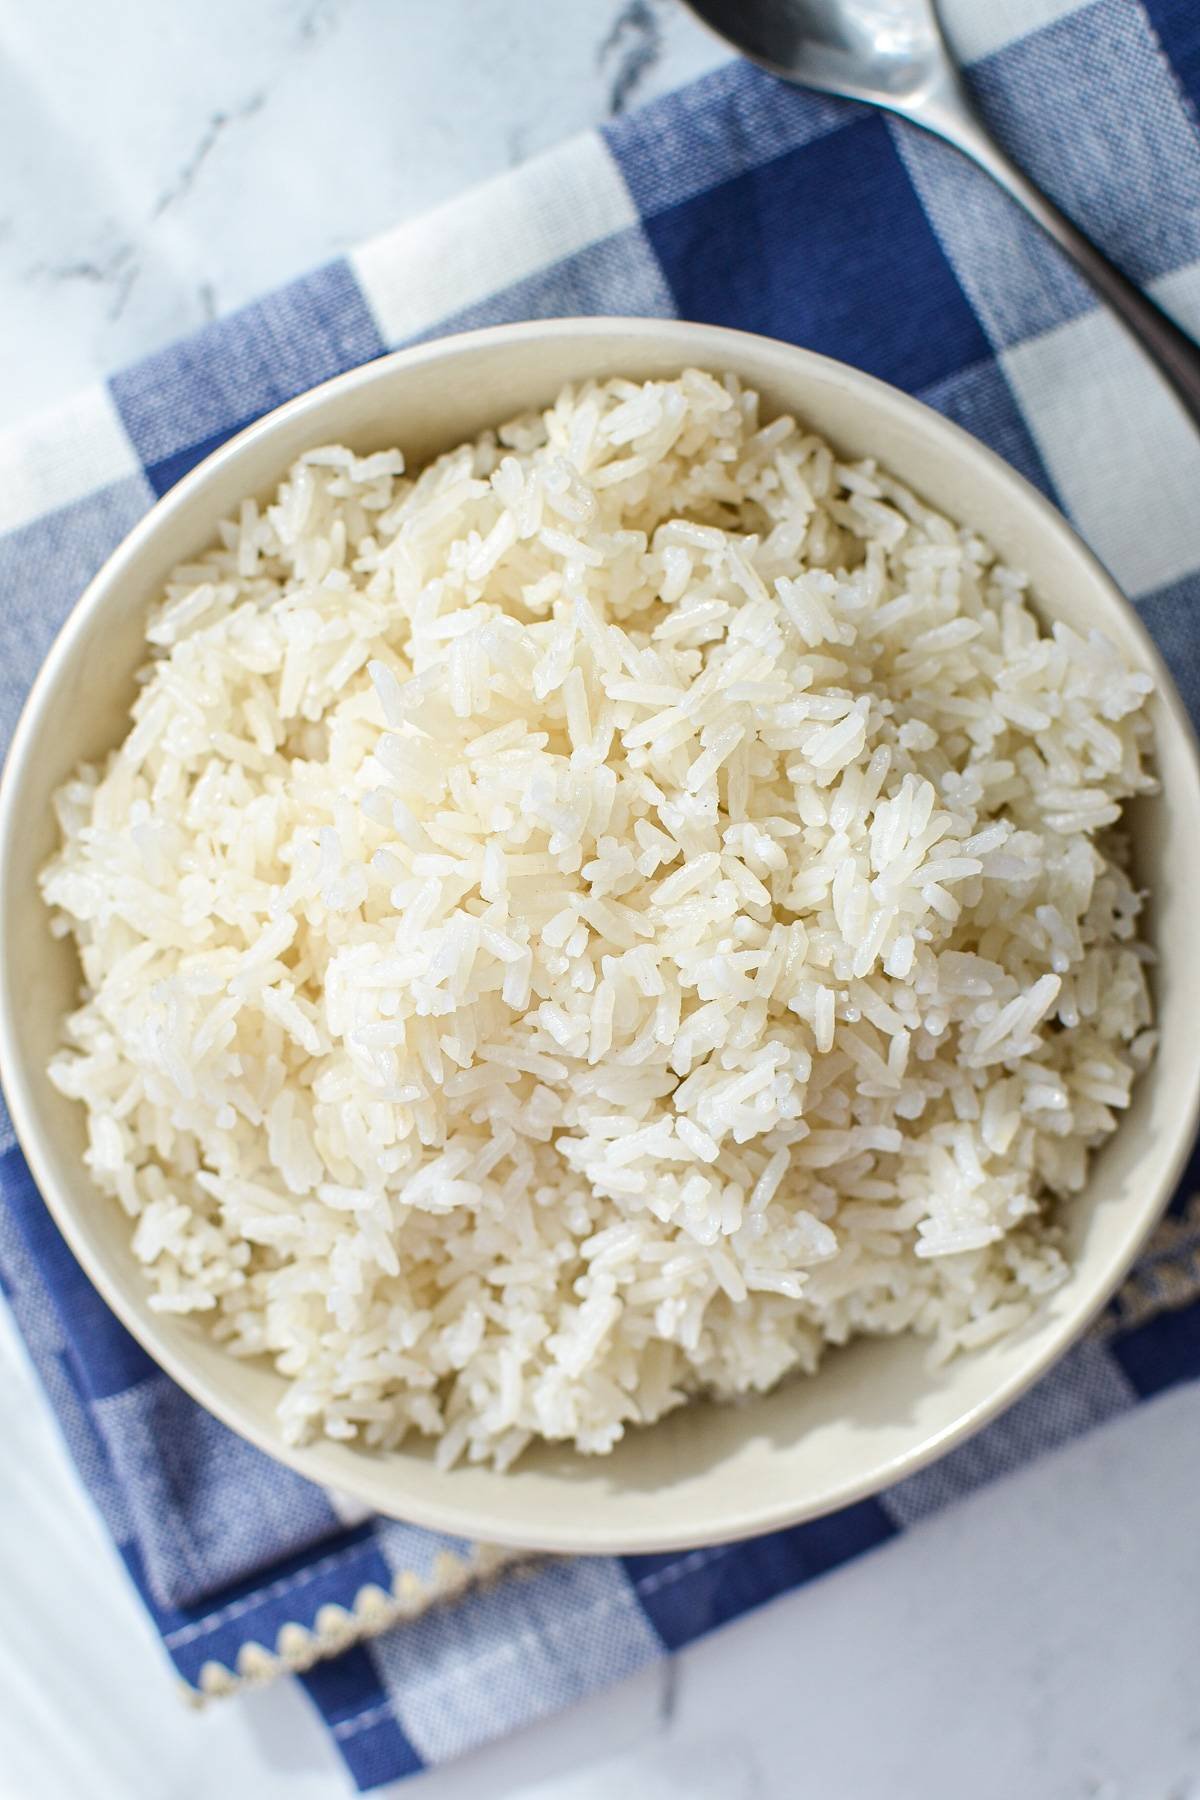 A bowl of white rice on a blue check napkin.